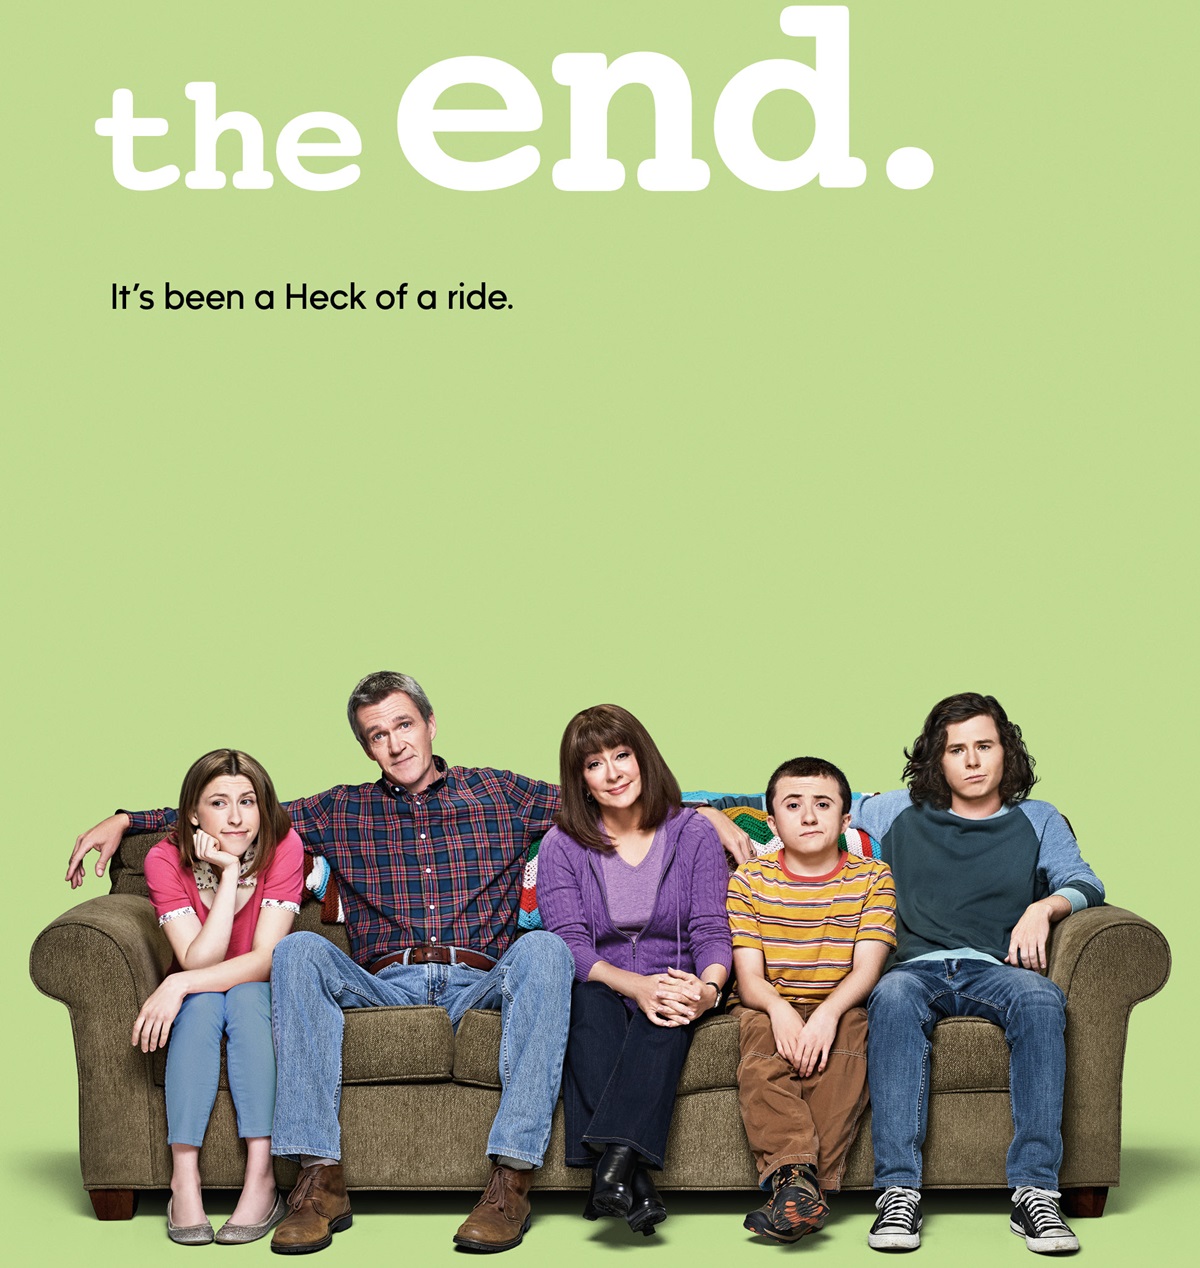 The middle